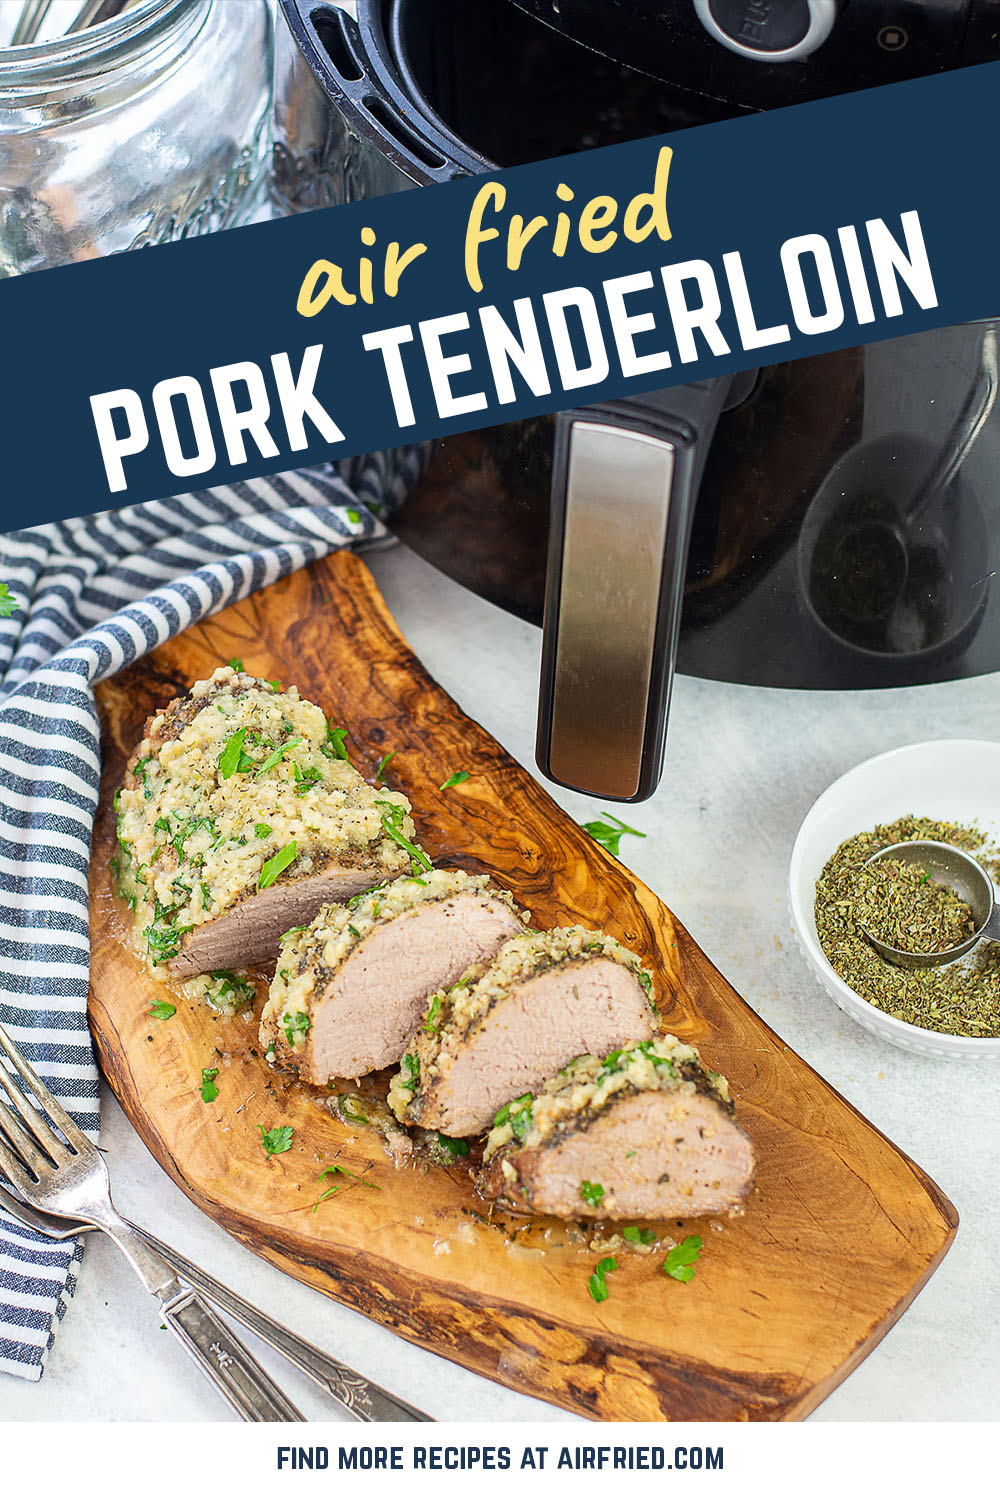 This pork tenderloin is an absolute joy to make.  The end result is a wonderful cut of meat ready to serve!